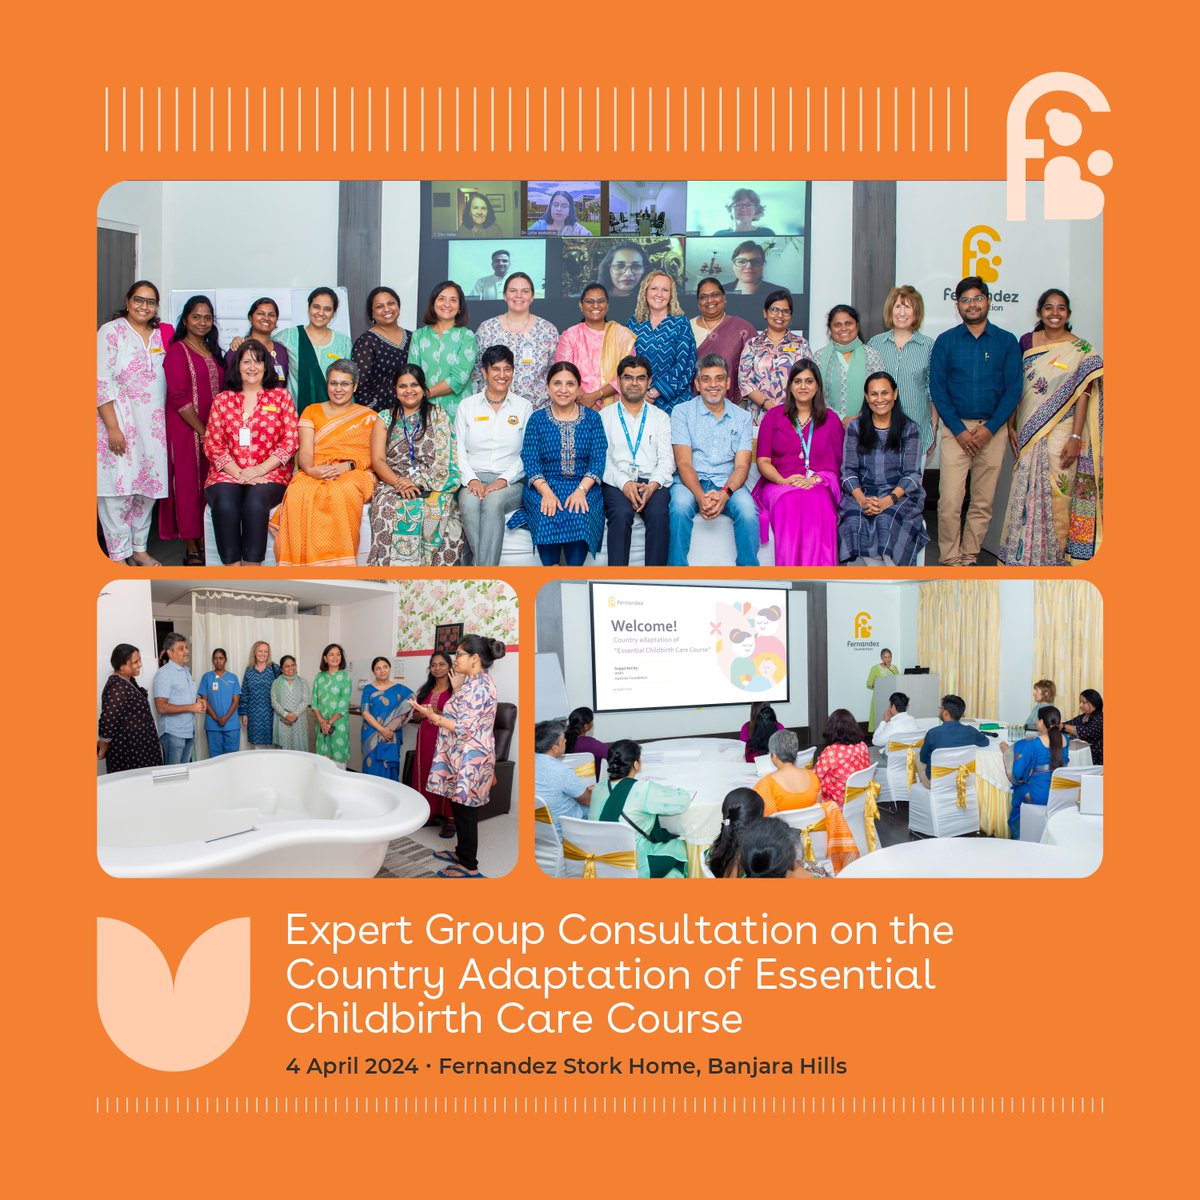 On 4th April, #FernandezFoundation hosted an Expert Group Consultation on the Country Adaptation of the Essential Childbirth Care Course (ECBC). Supported by the World Health Organization (WHO) and Aastrika Foundation, the event aimed to adapt and contextualise ECBC.